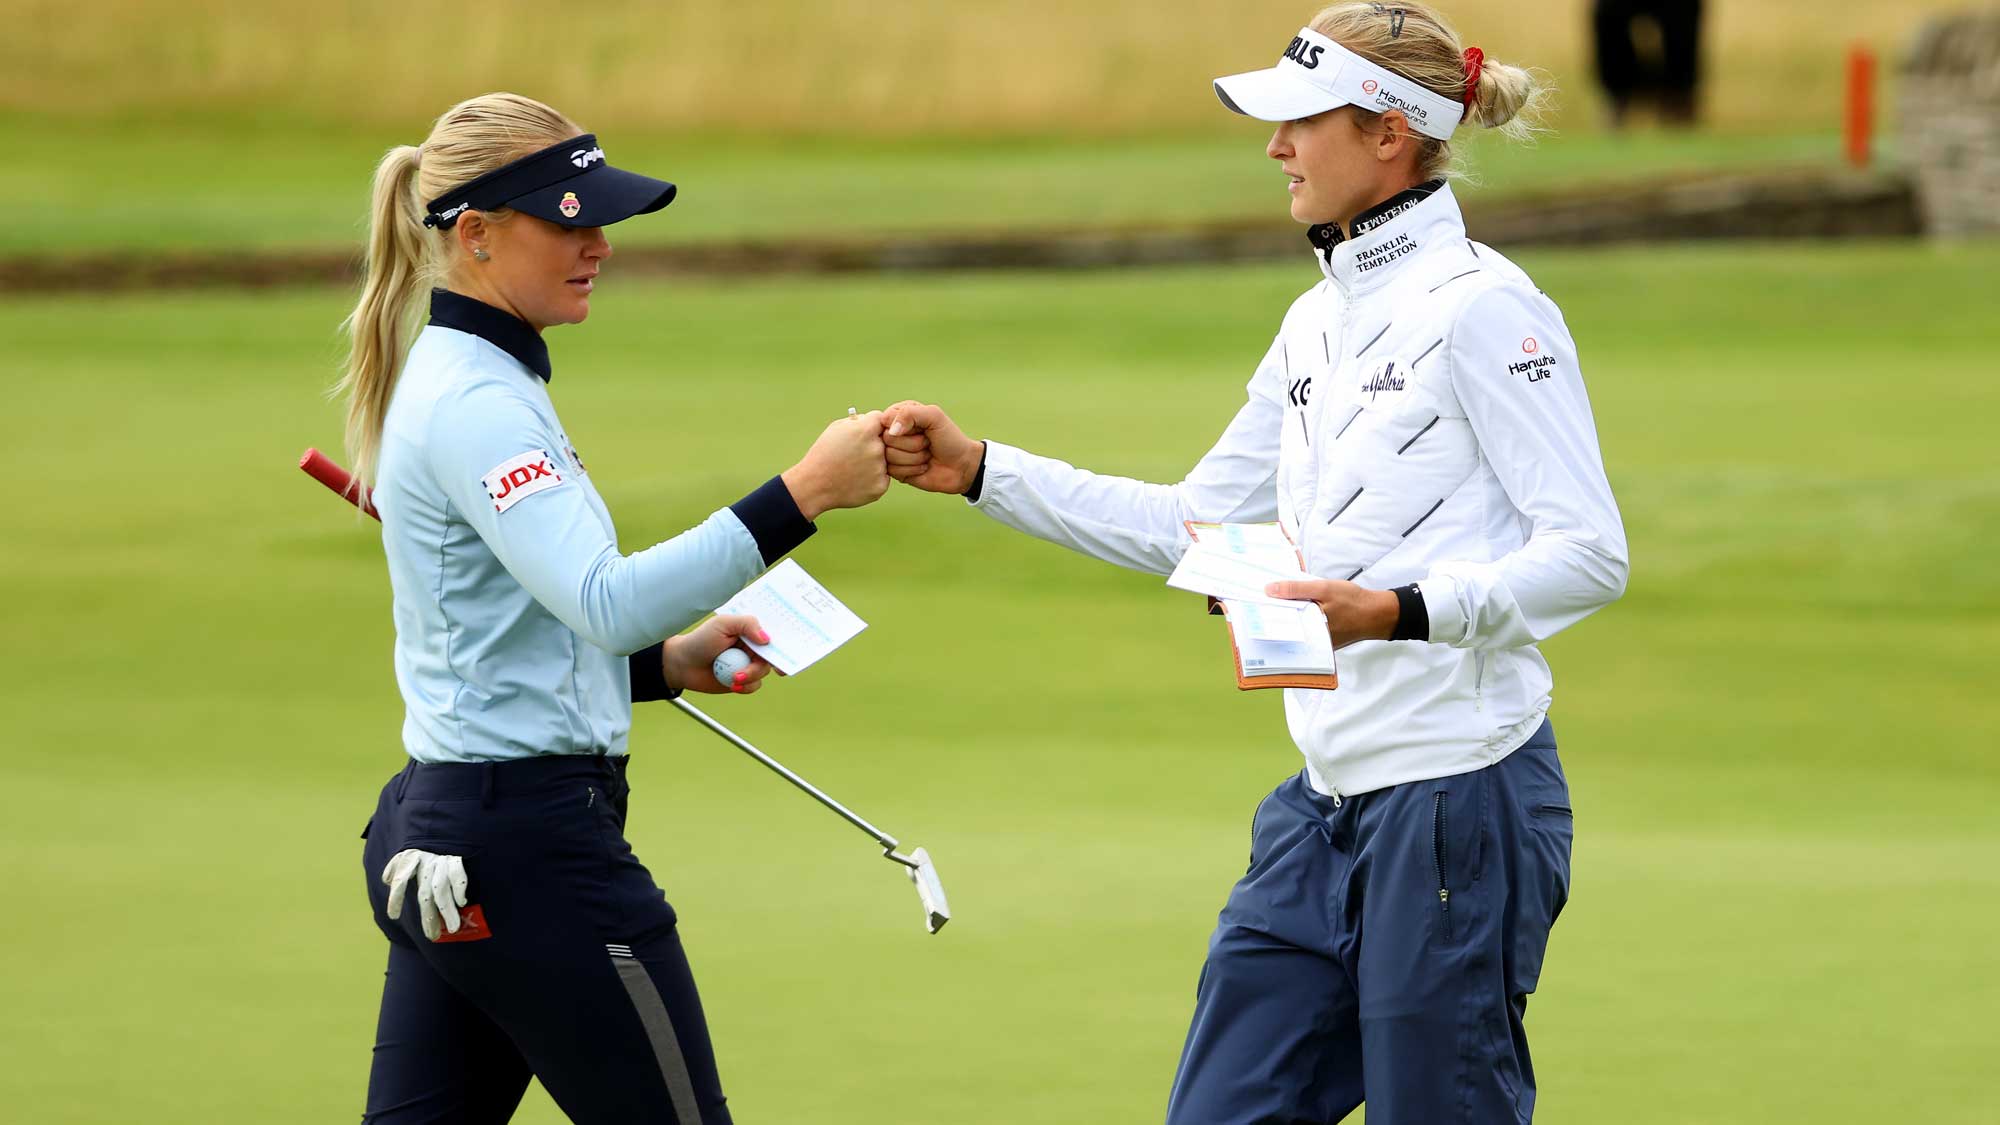 Charley Hull and Nelly Korda